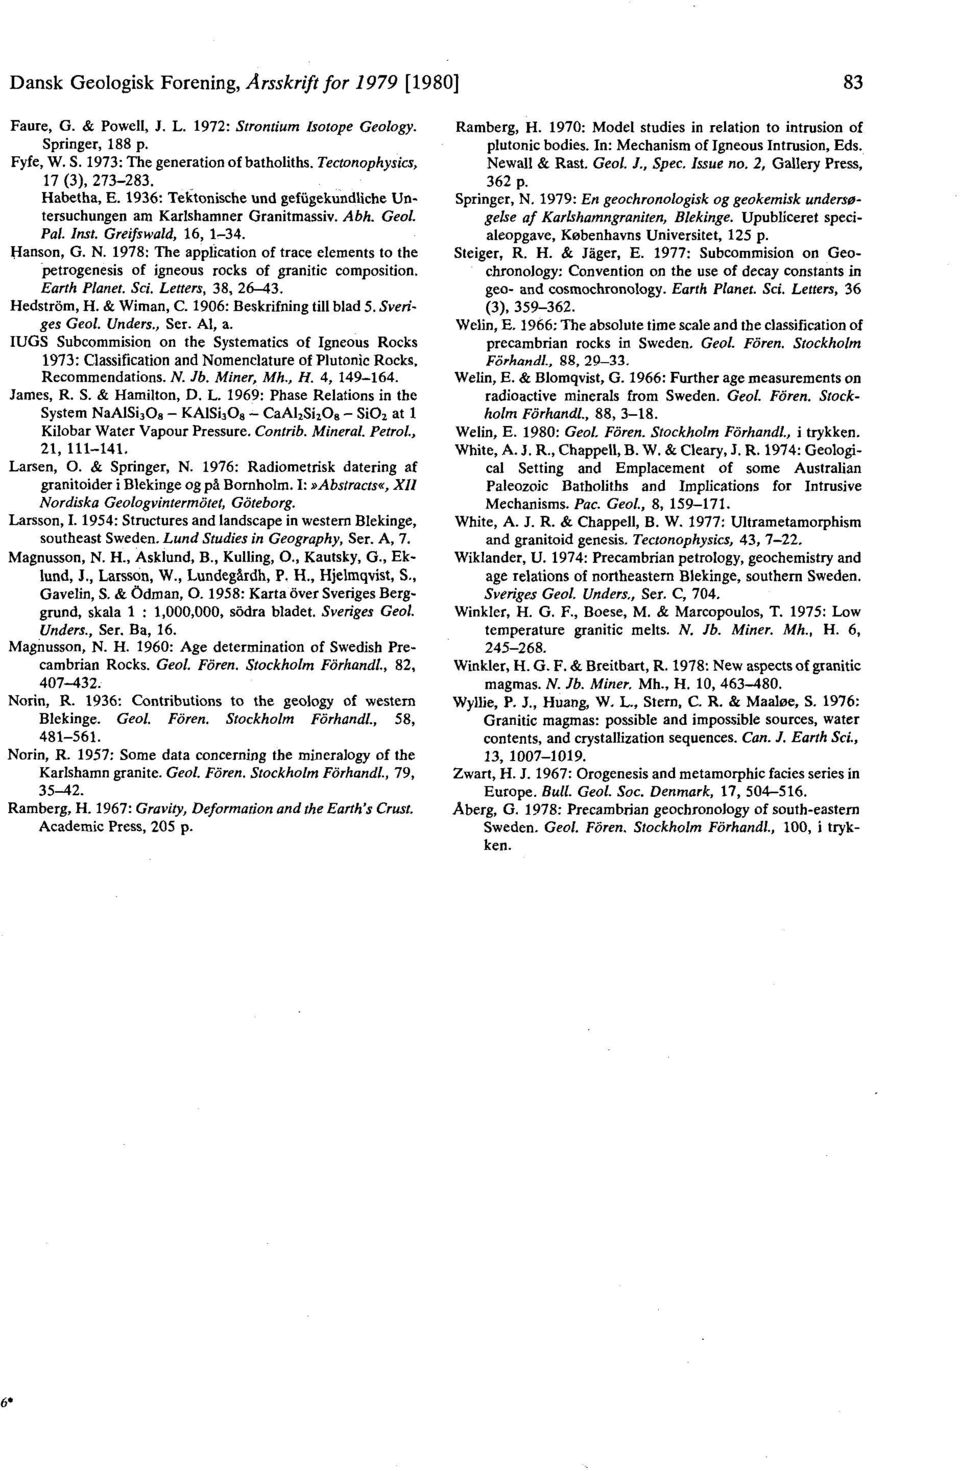 1978: The application of trace elements to the petrogenesis of igneous rocks of granitic composition. Earth Planet. Sci. Letters, 38, 26-43. Hedstrom, H. & Wiman, C. 1906: Beskrifning till blad 5.